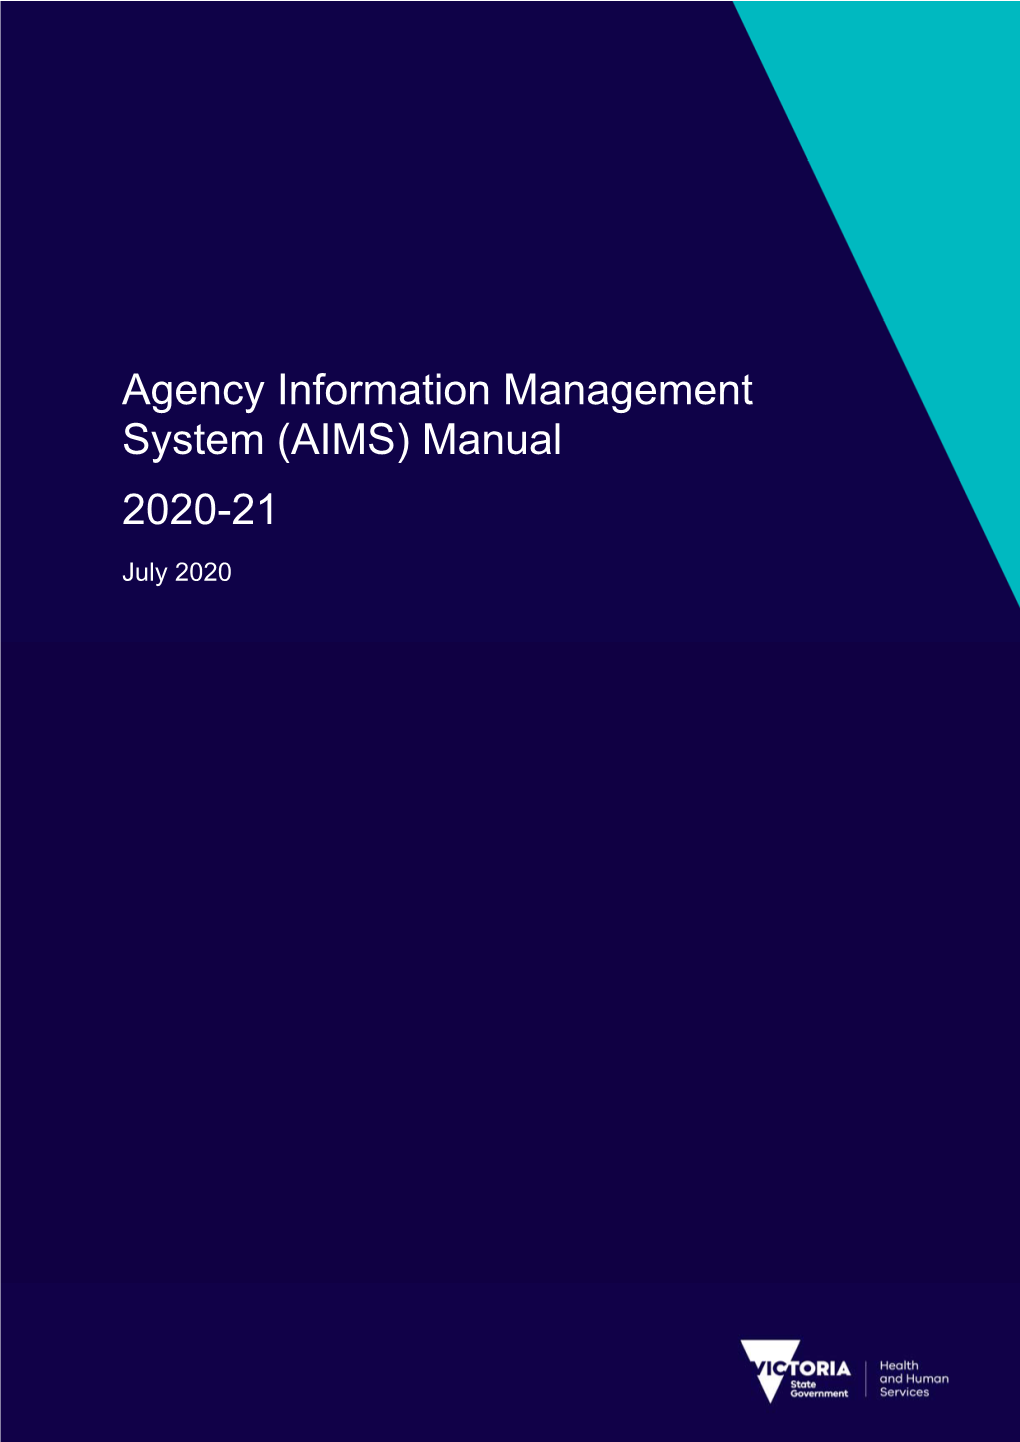 Agency Information Management System (AIMS) Manual 2020-21